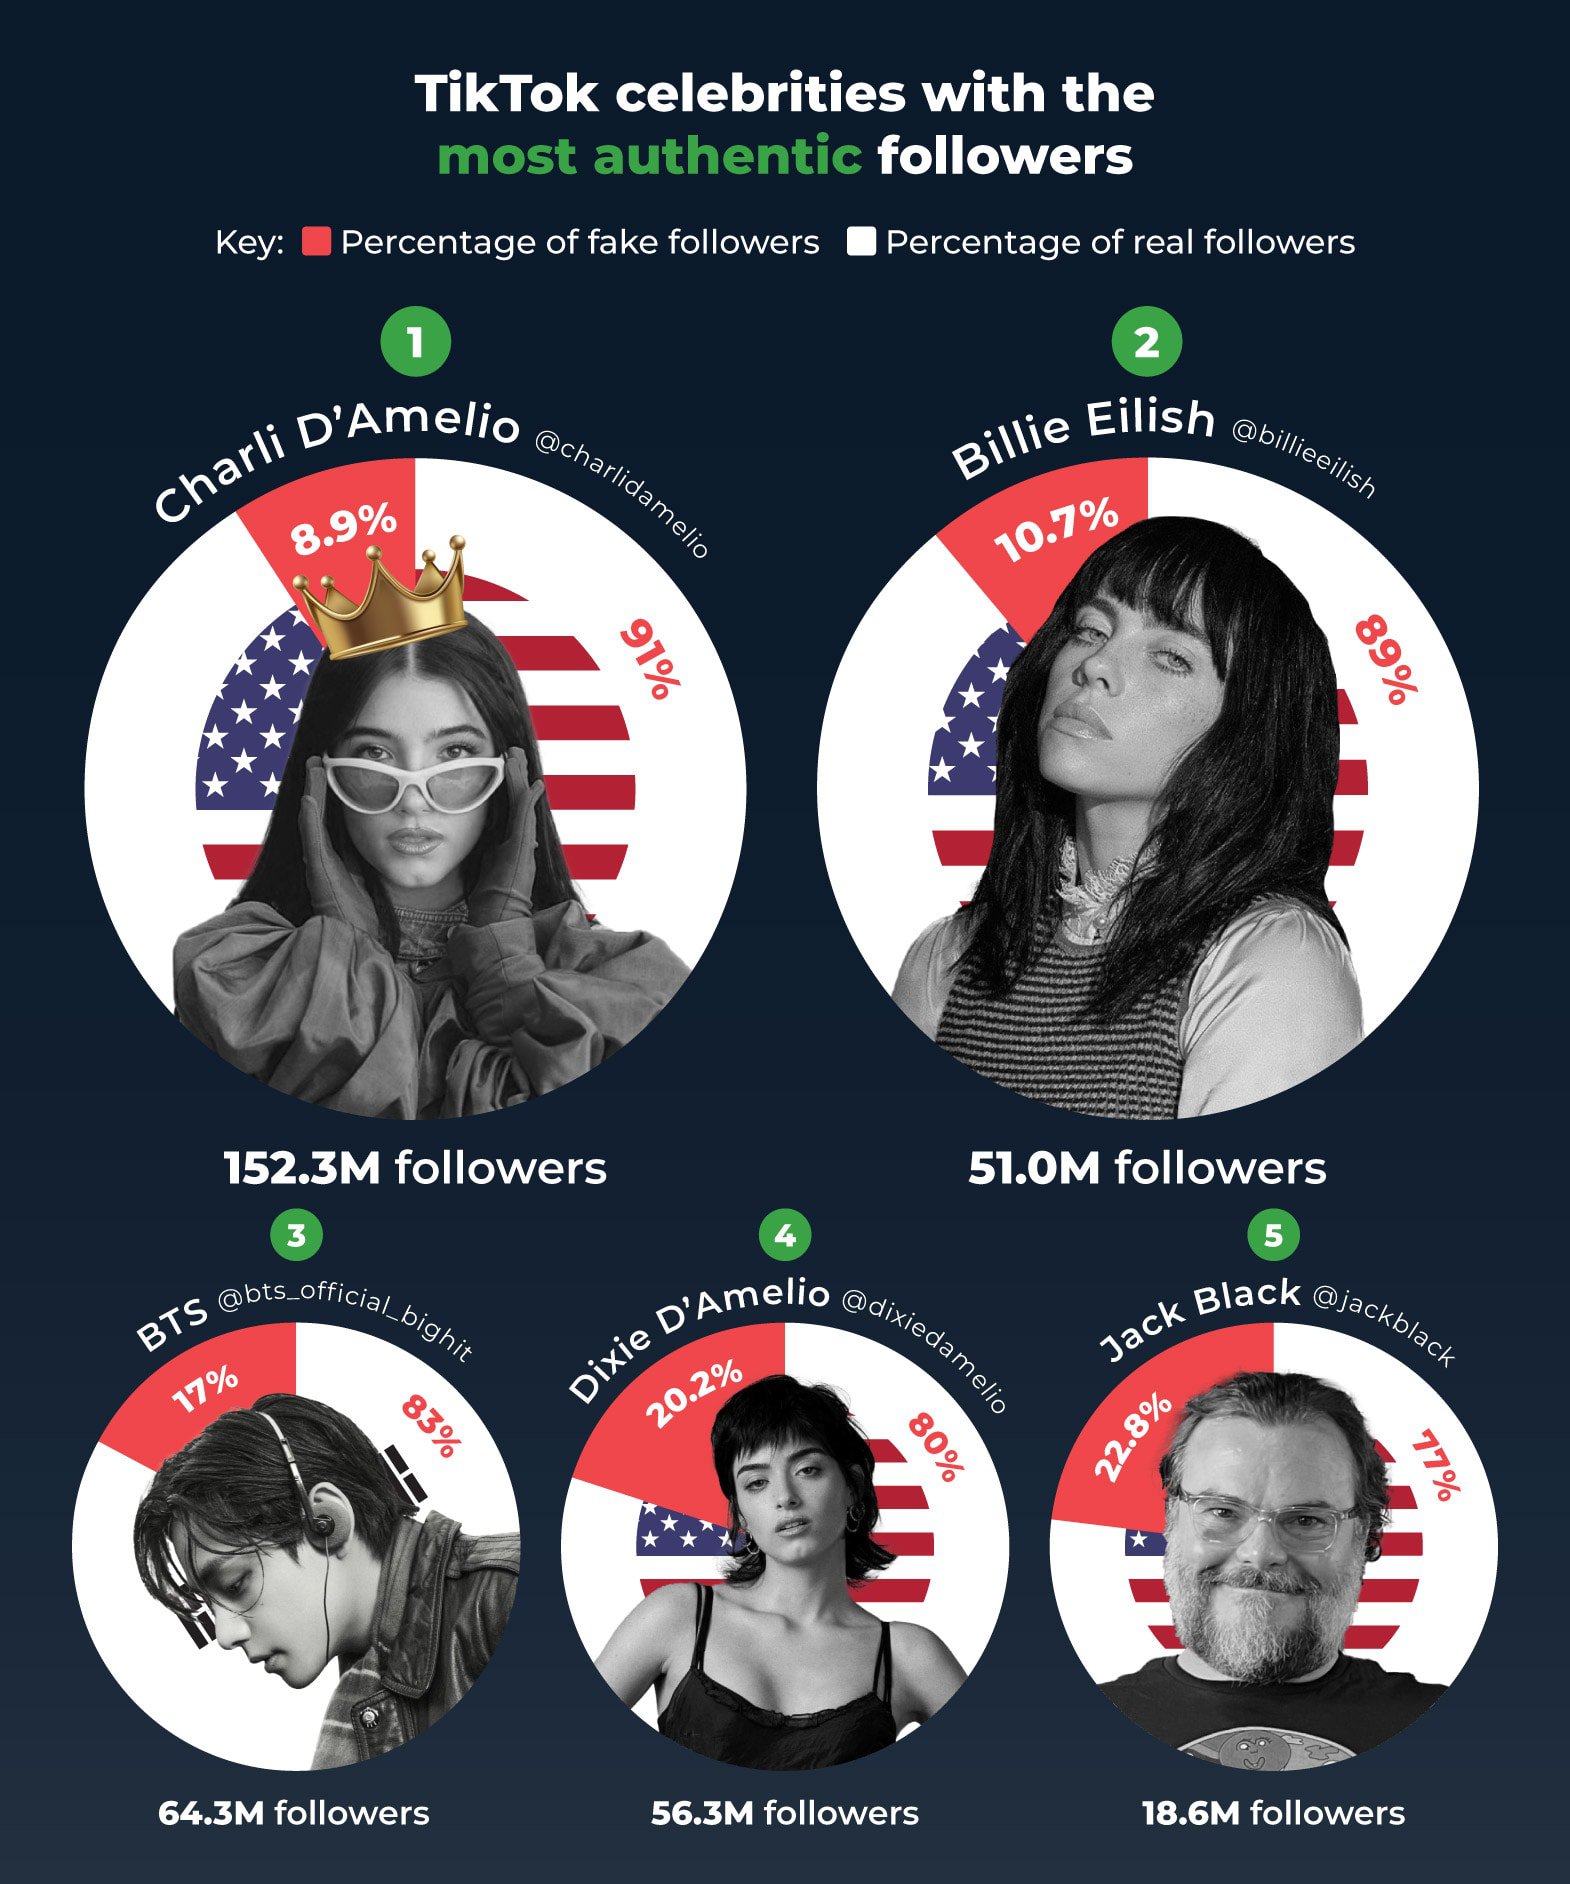 TikTok celebrities with the most authentic followers